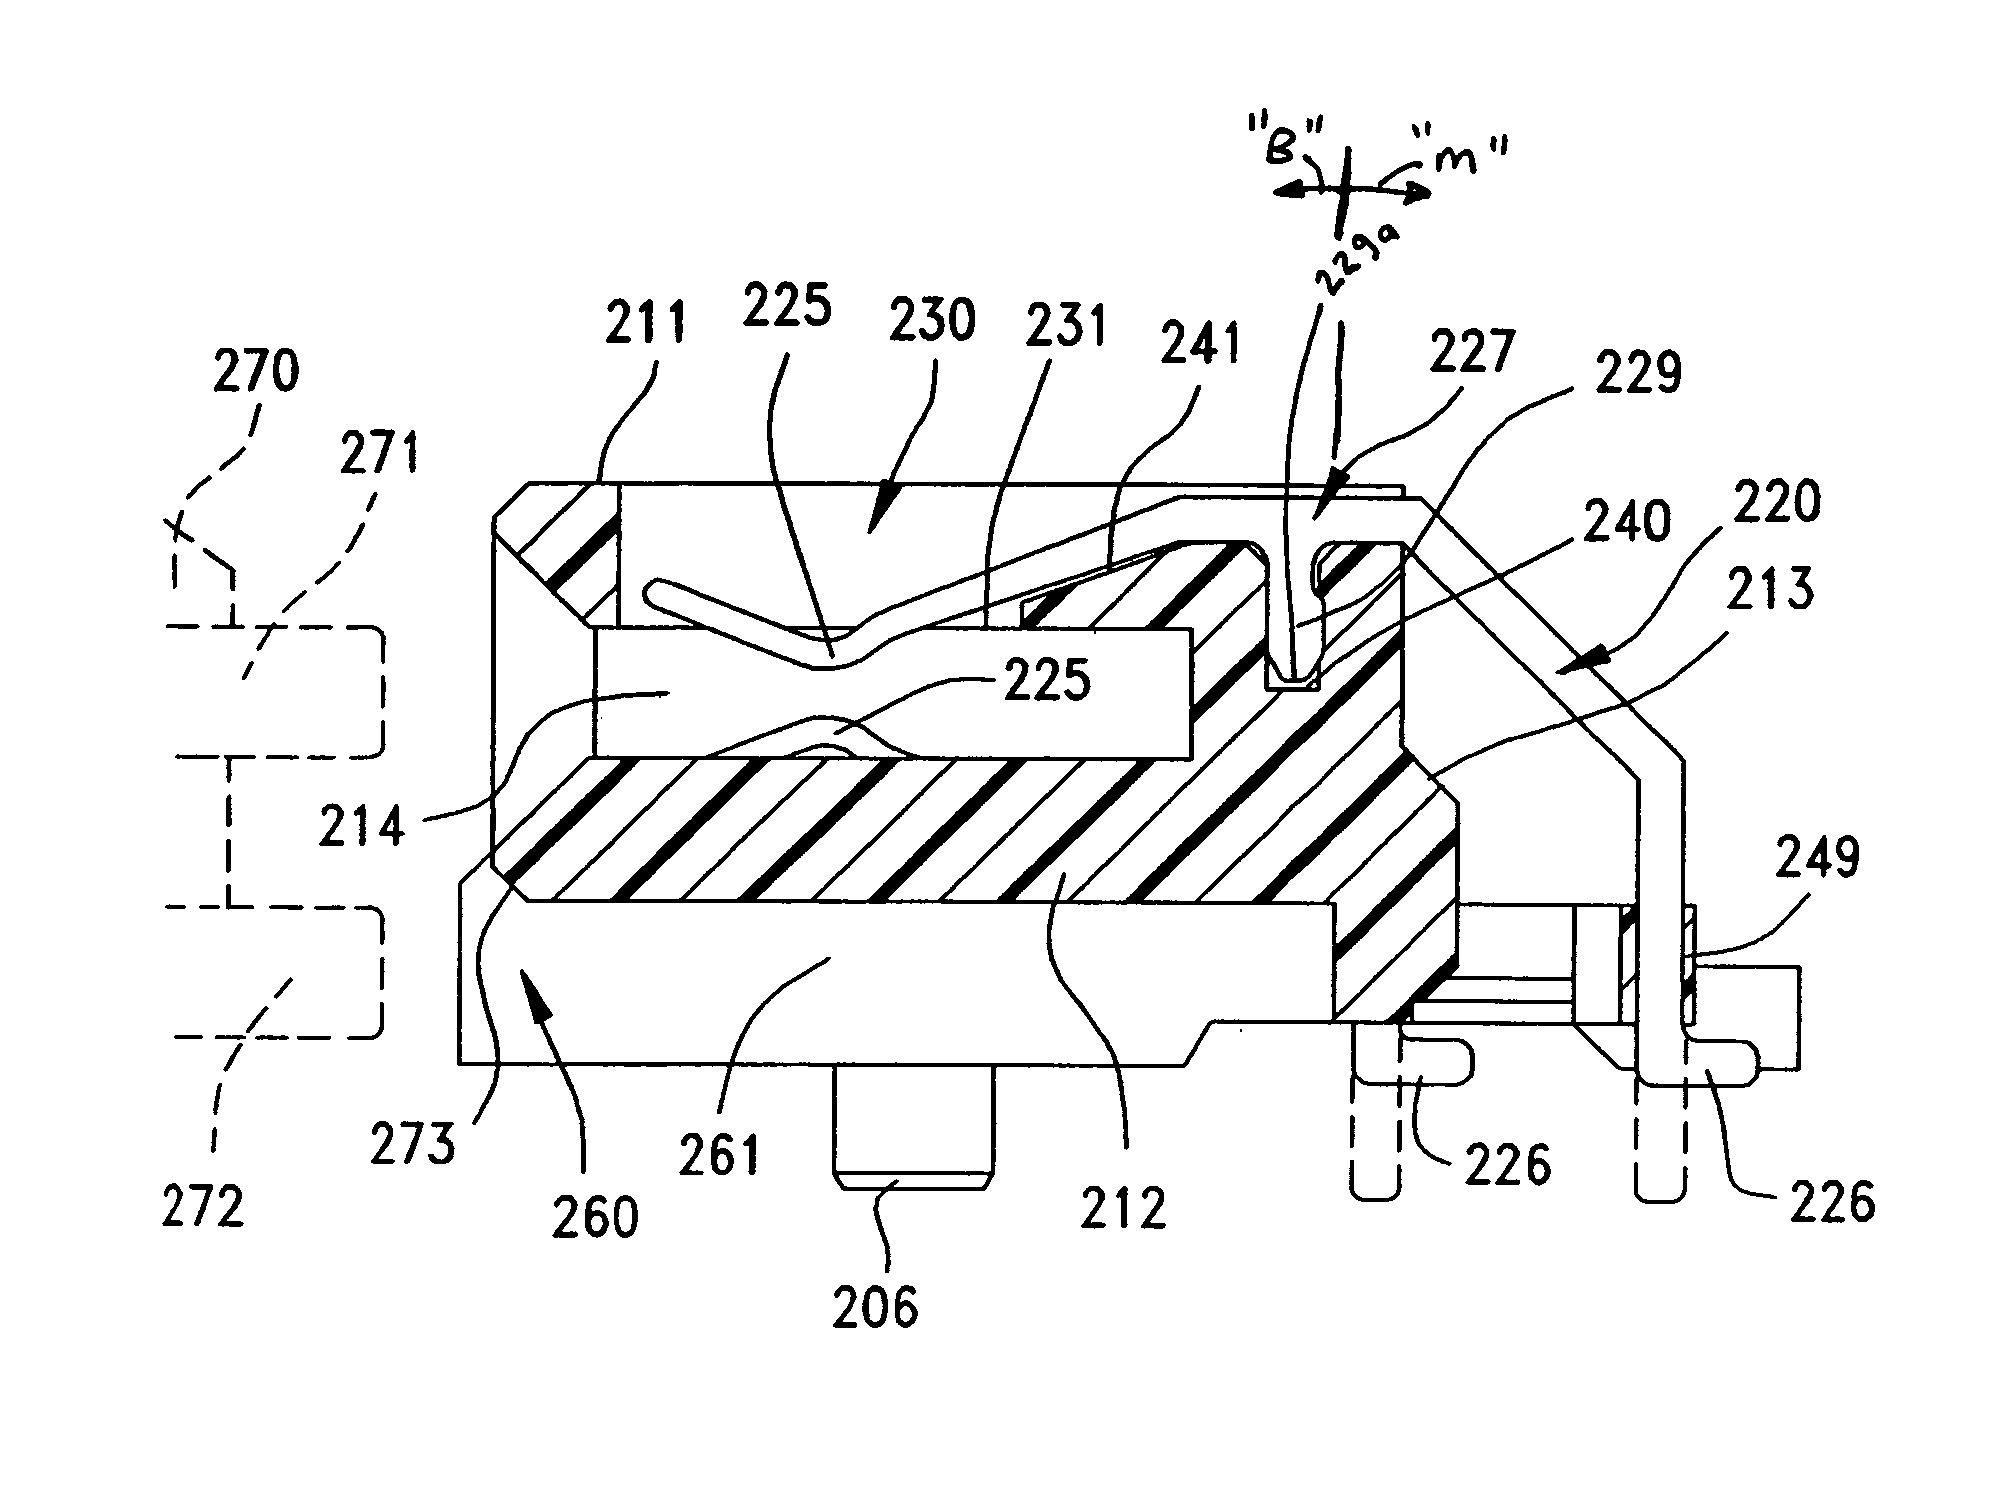 Edge card connector assembly with high-speed terminals